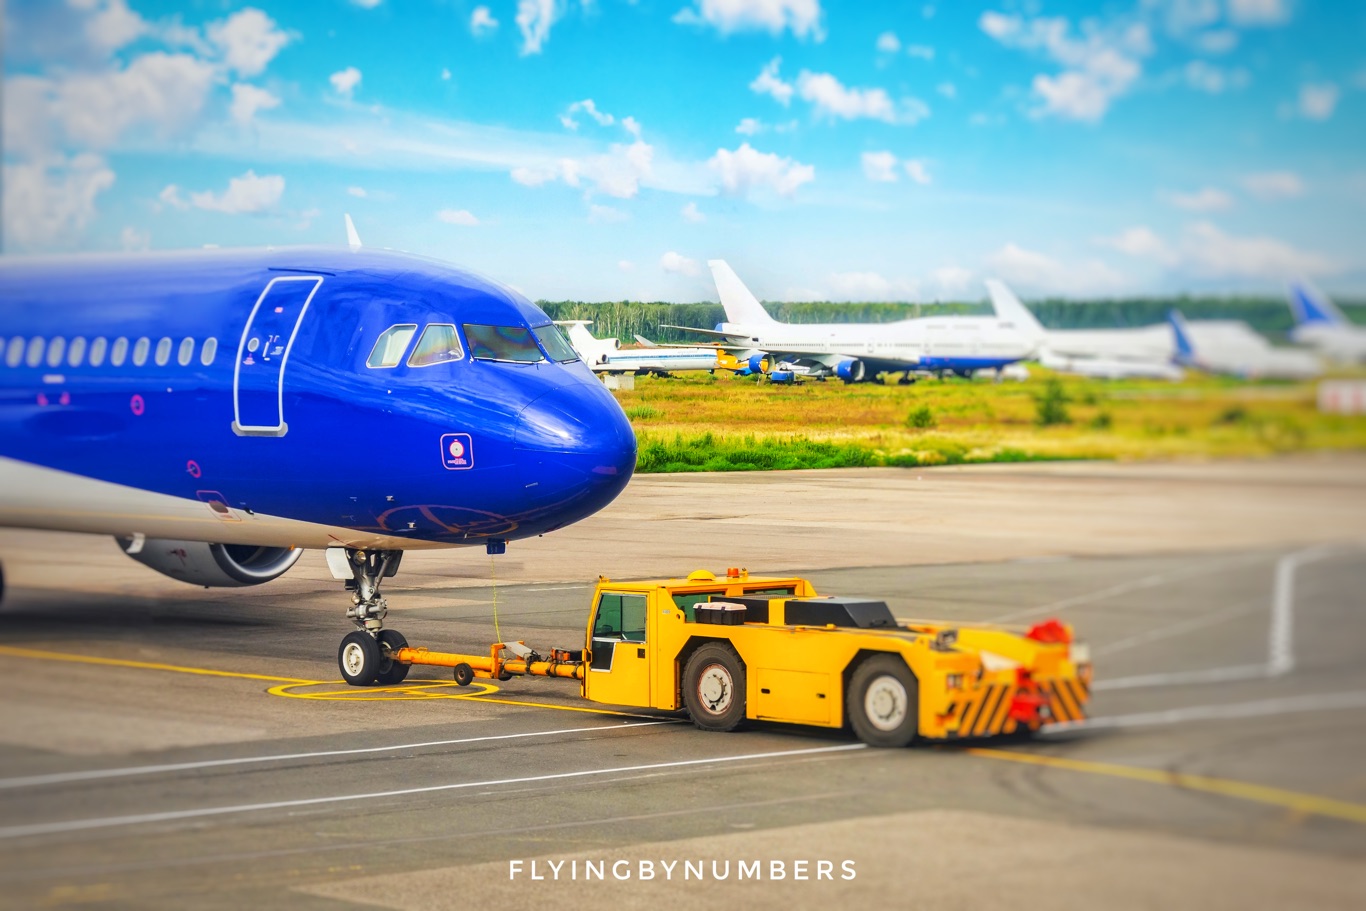 Pushback tug pushing an A320 back from its parking position